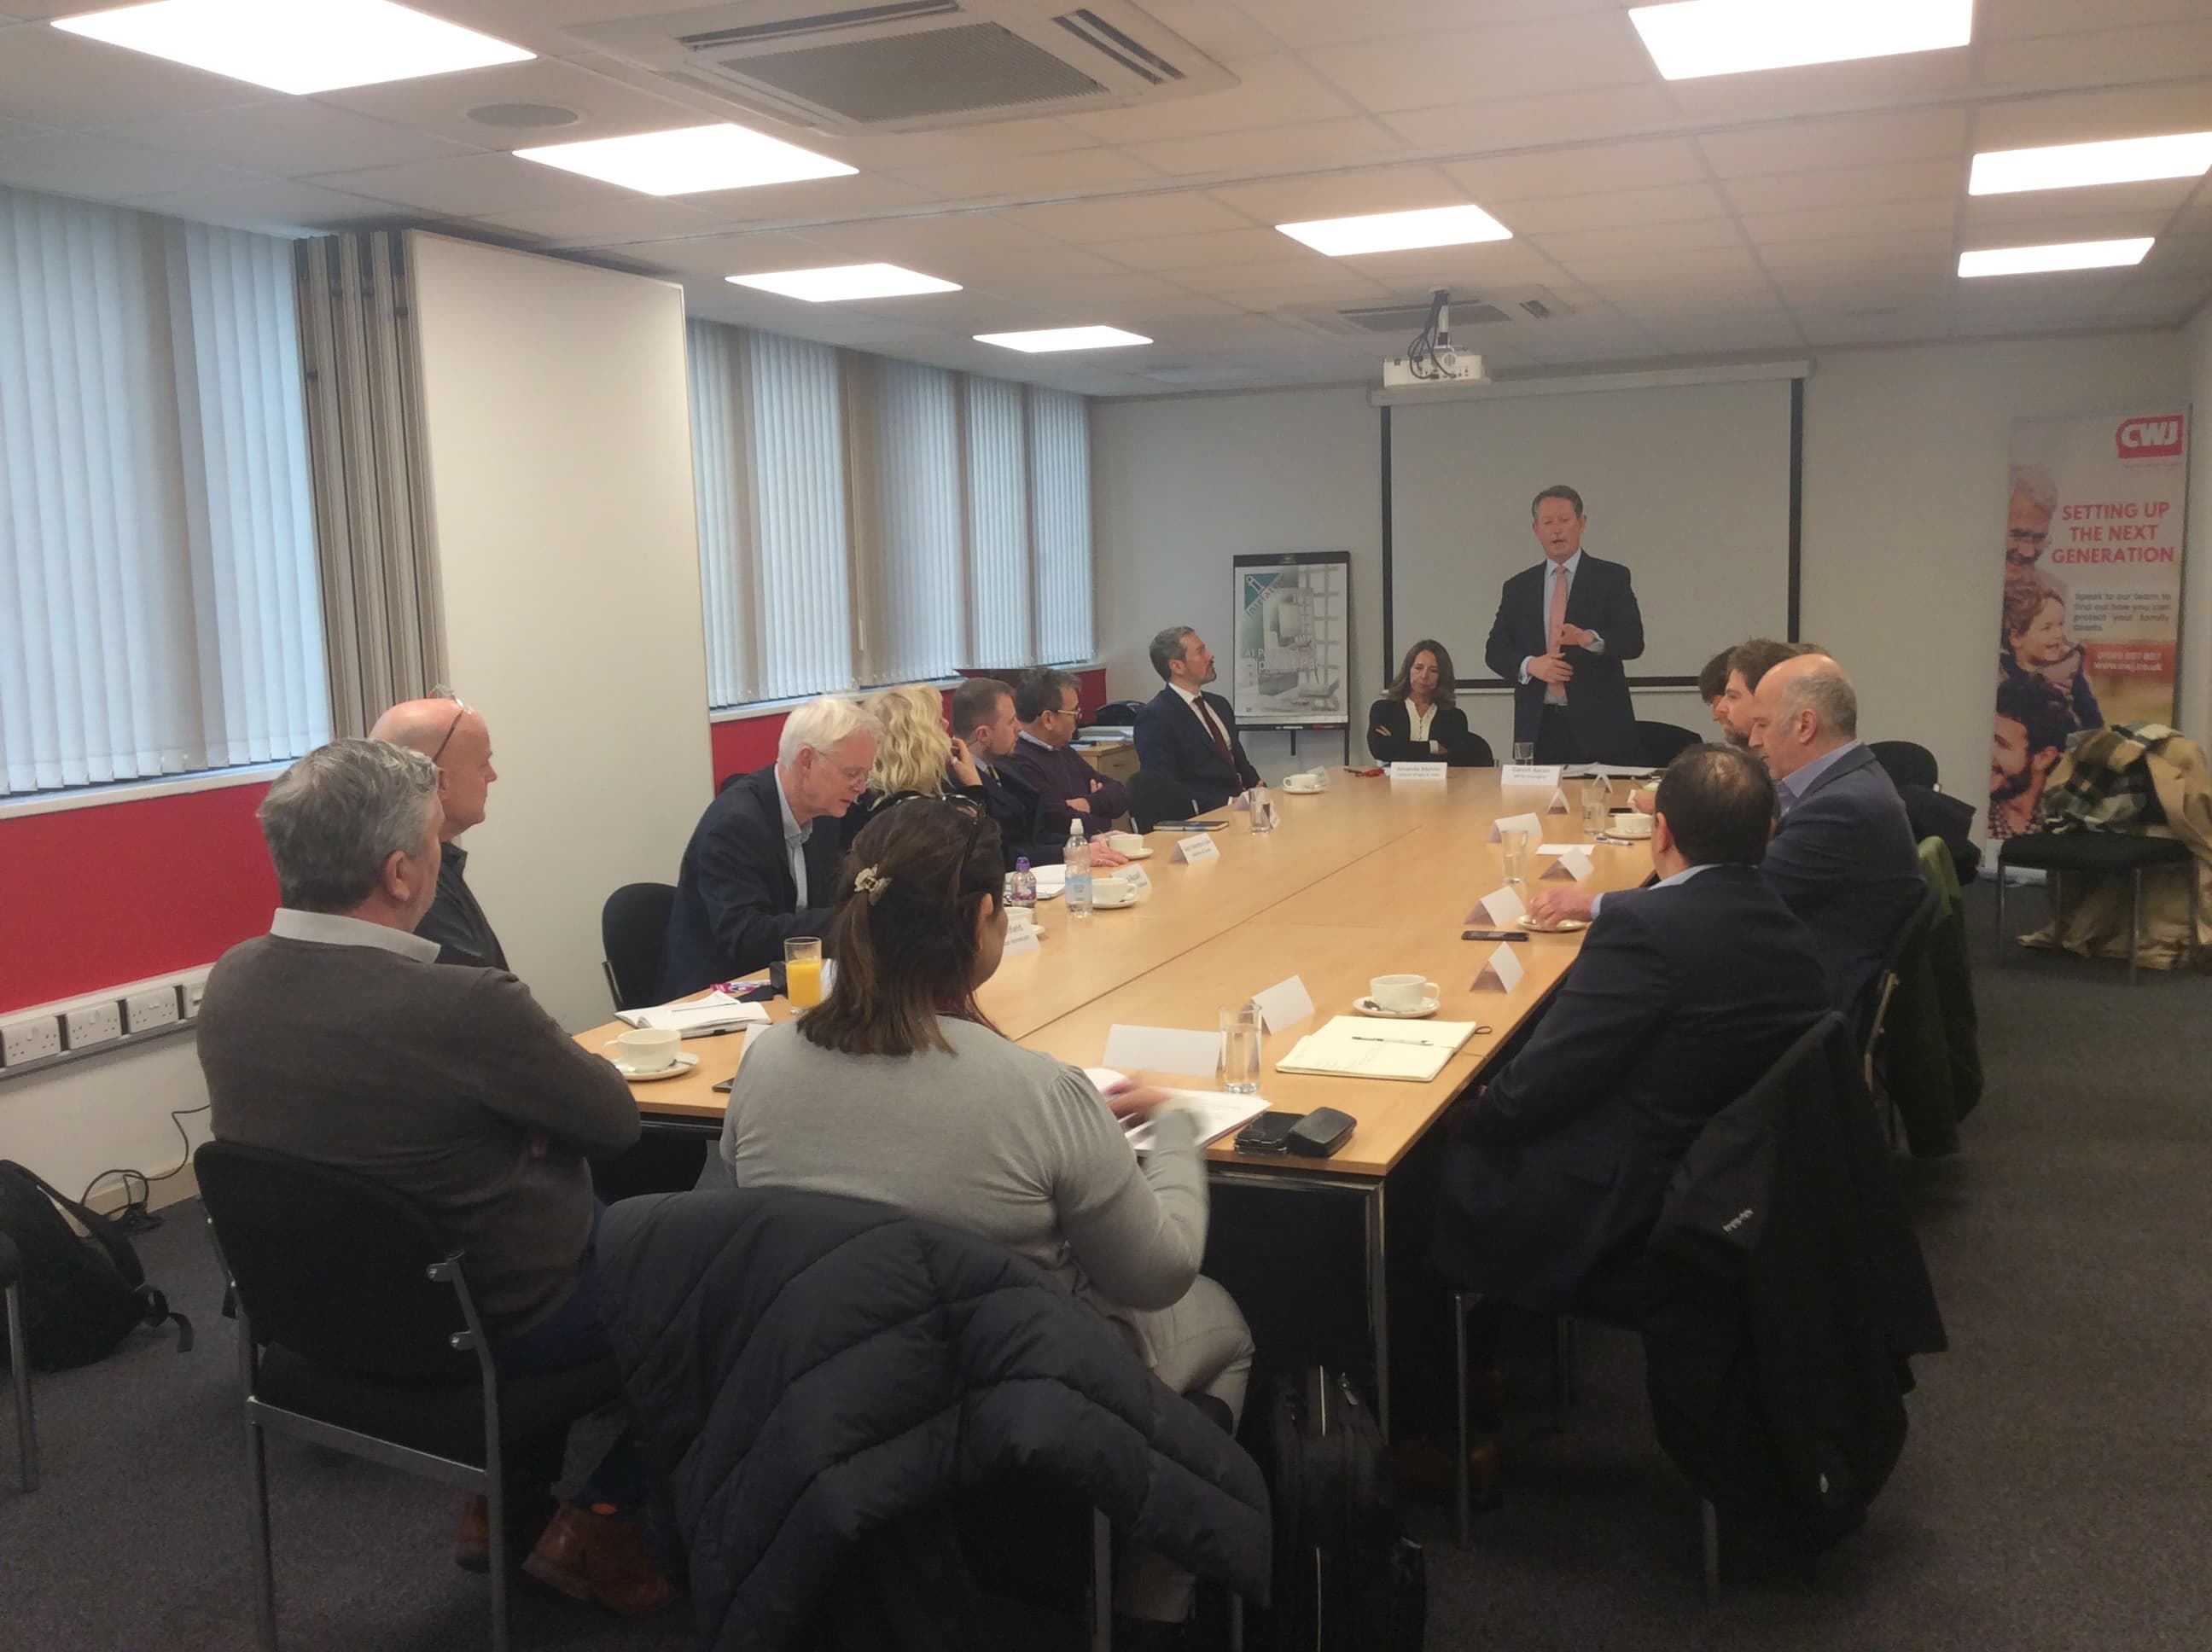 Businesses get around the table with Gareth Bacon MP